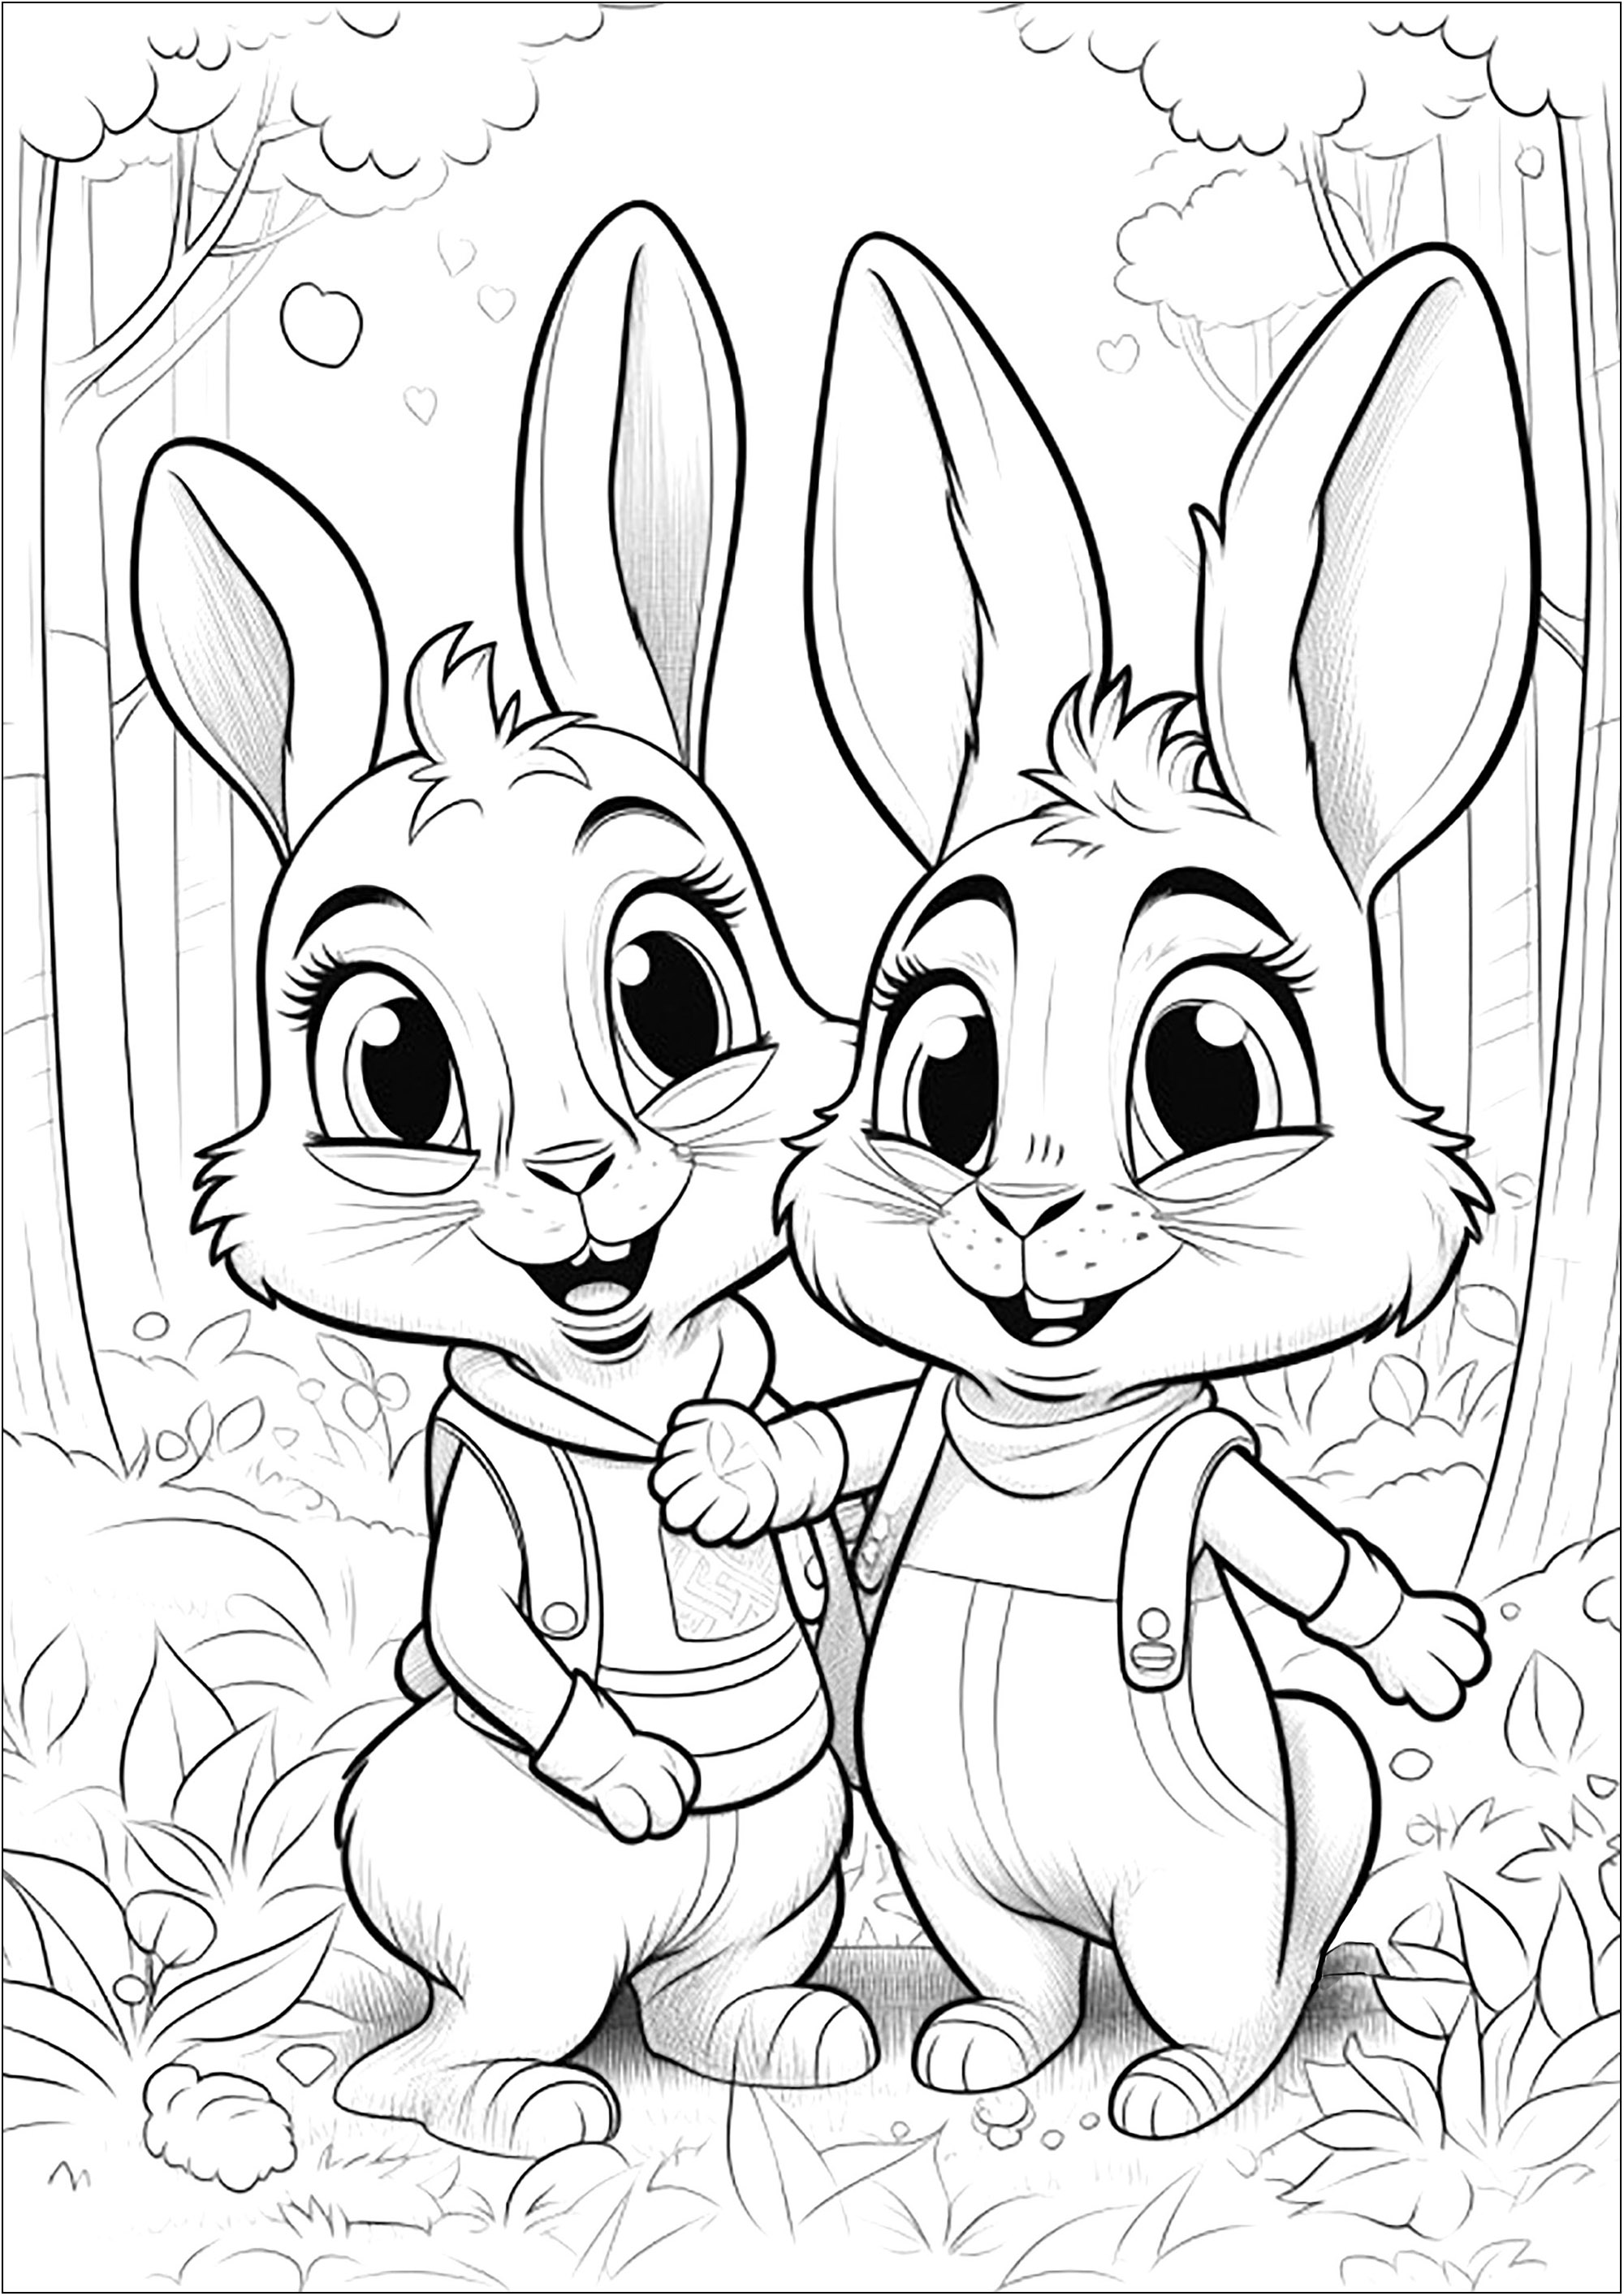 Two little rabbits in the forest - 2. Nice coloring of two cute rabbits having fun in the forest